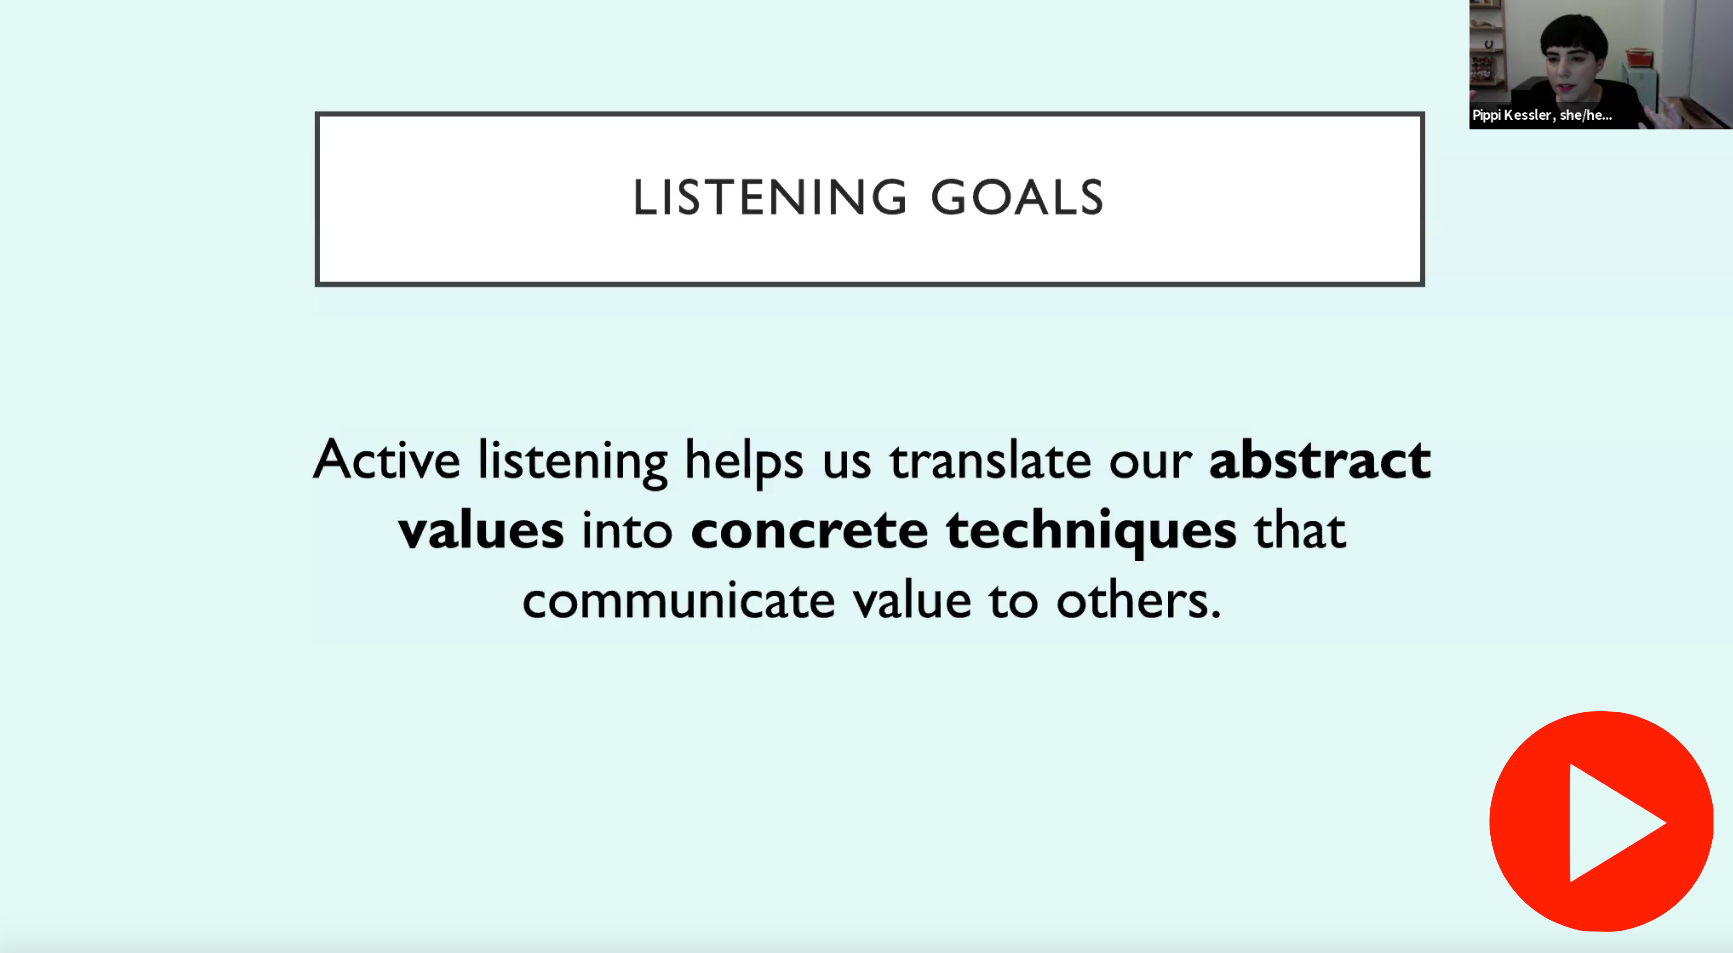 Screenshot of a video presentation by Pippi Kessler. She is in a room wearing a black top and has short black hair. The header reads “Listening Goals” with the body of the text reading “Active listening helps us translate our abstract values into concrete techniques that communicate value to others. 